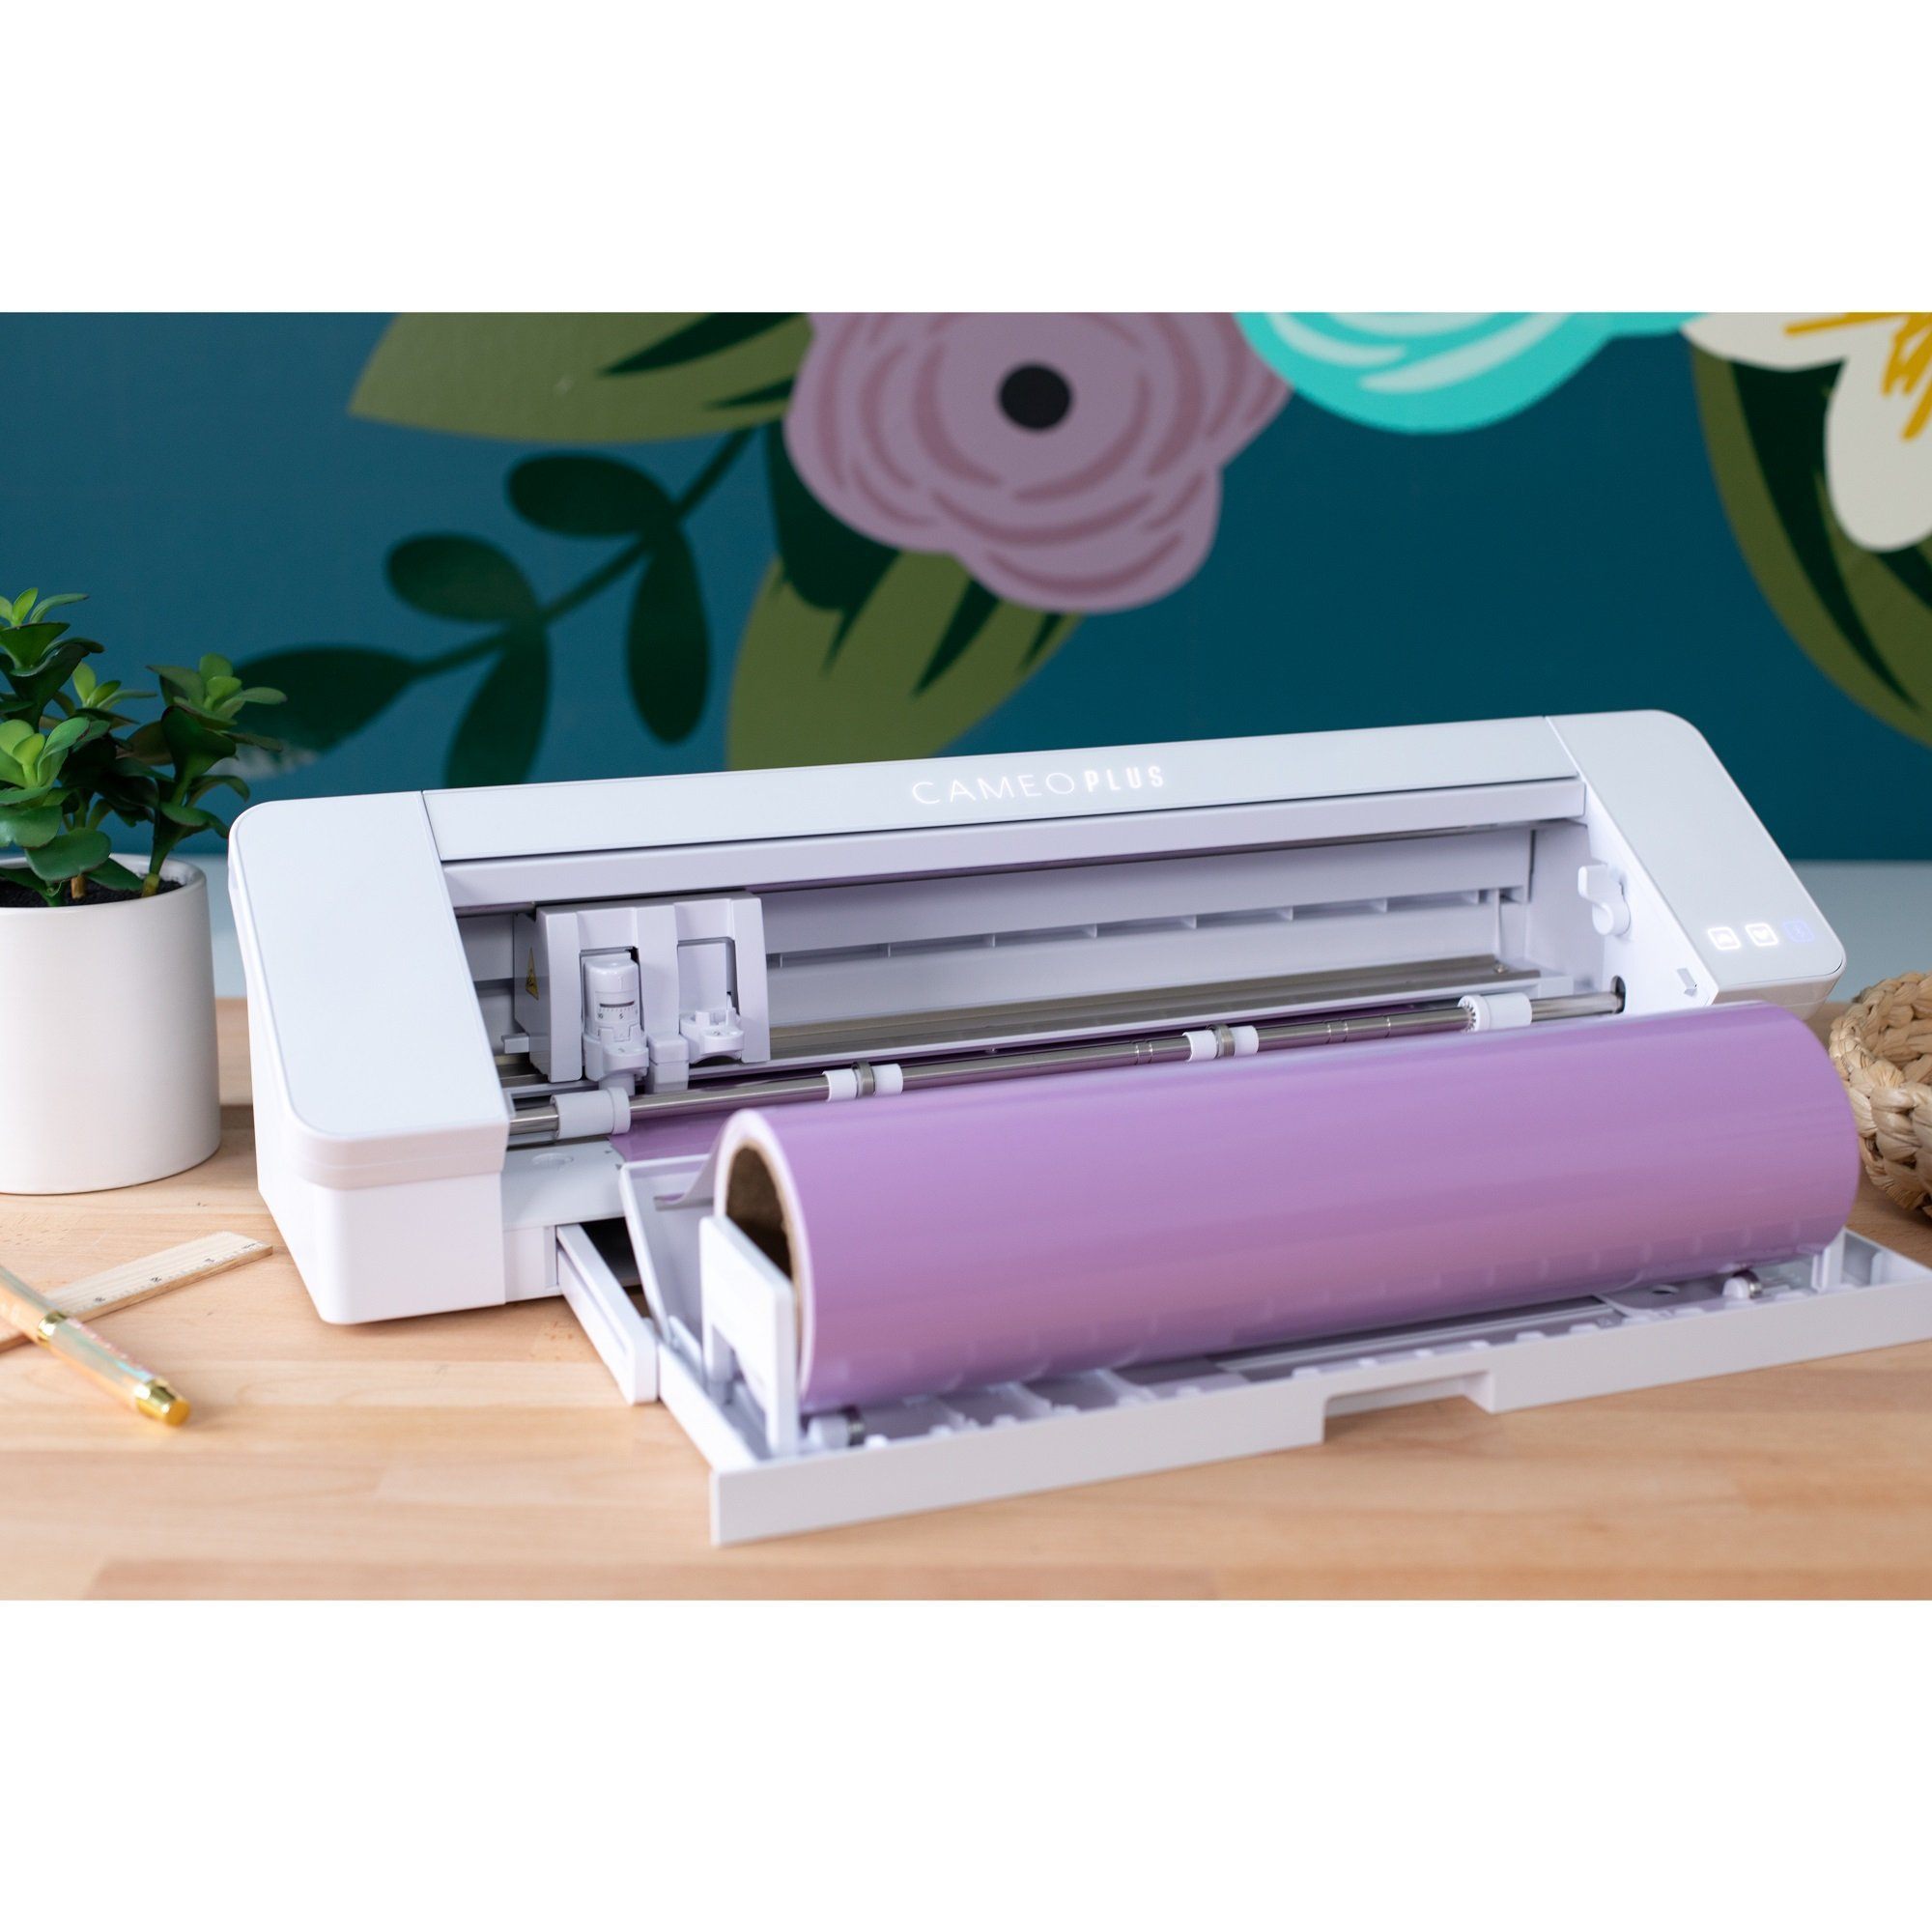 15 Silhouette Cameo 4 Plus Electronic Cutting Tool - USCutter